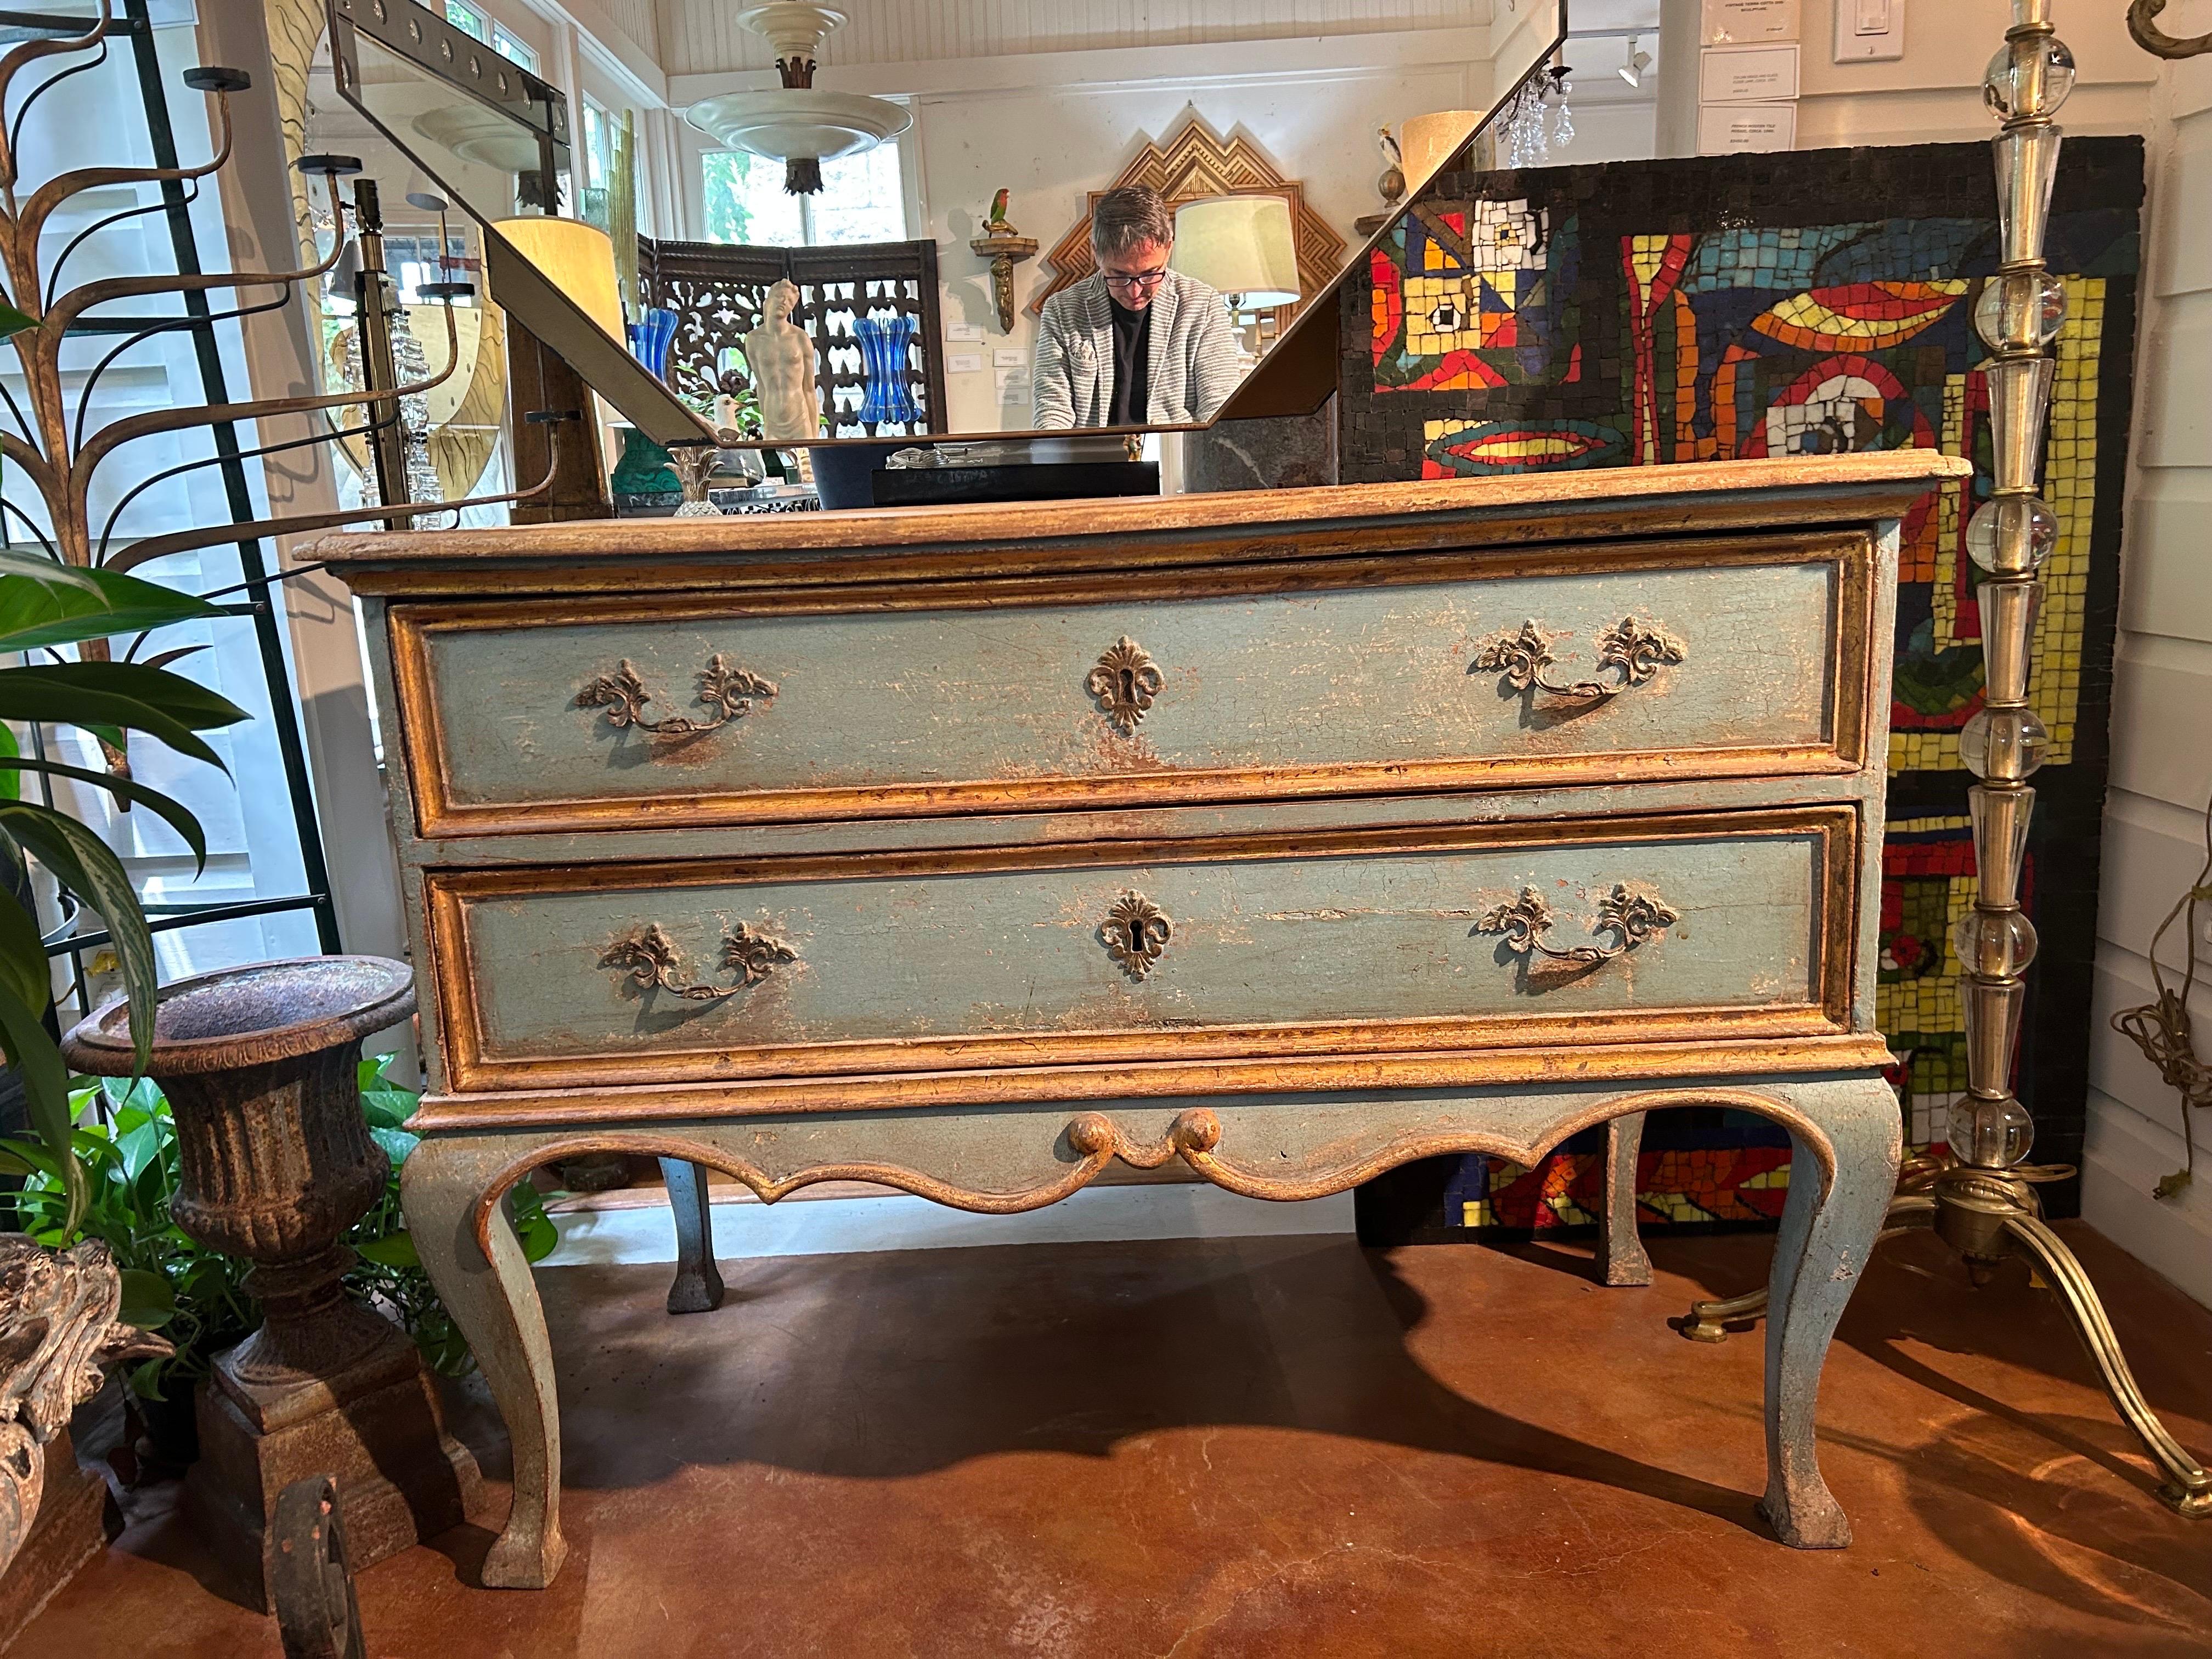 18th Century Italian Painted Chest Or Commode.
Stunning 18th century Italian painted commode or chest with gilt accents from the Tuscany region of Italy. This lovely 2 drawer chest is painted a beautiful shade of blue with a parcel gilt trim and a